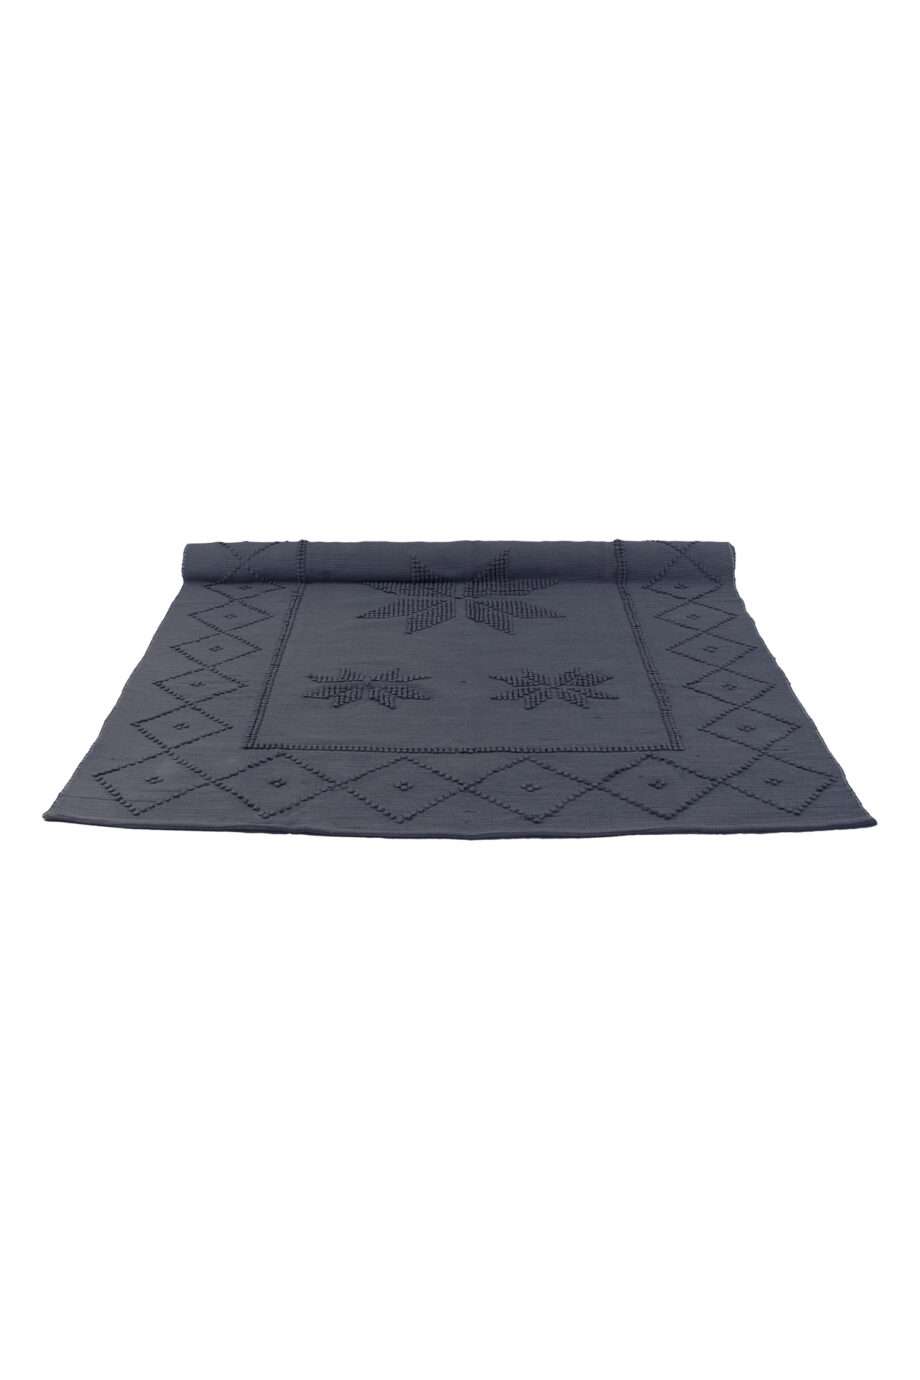 star navy blue woven cotton rug xlarge